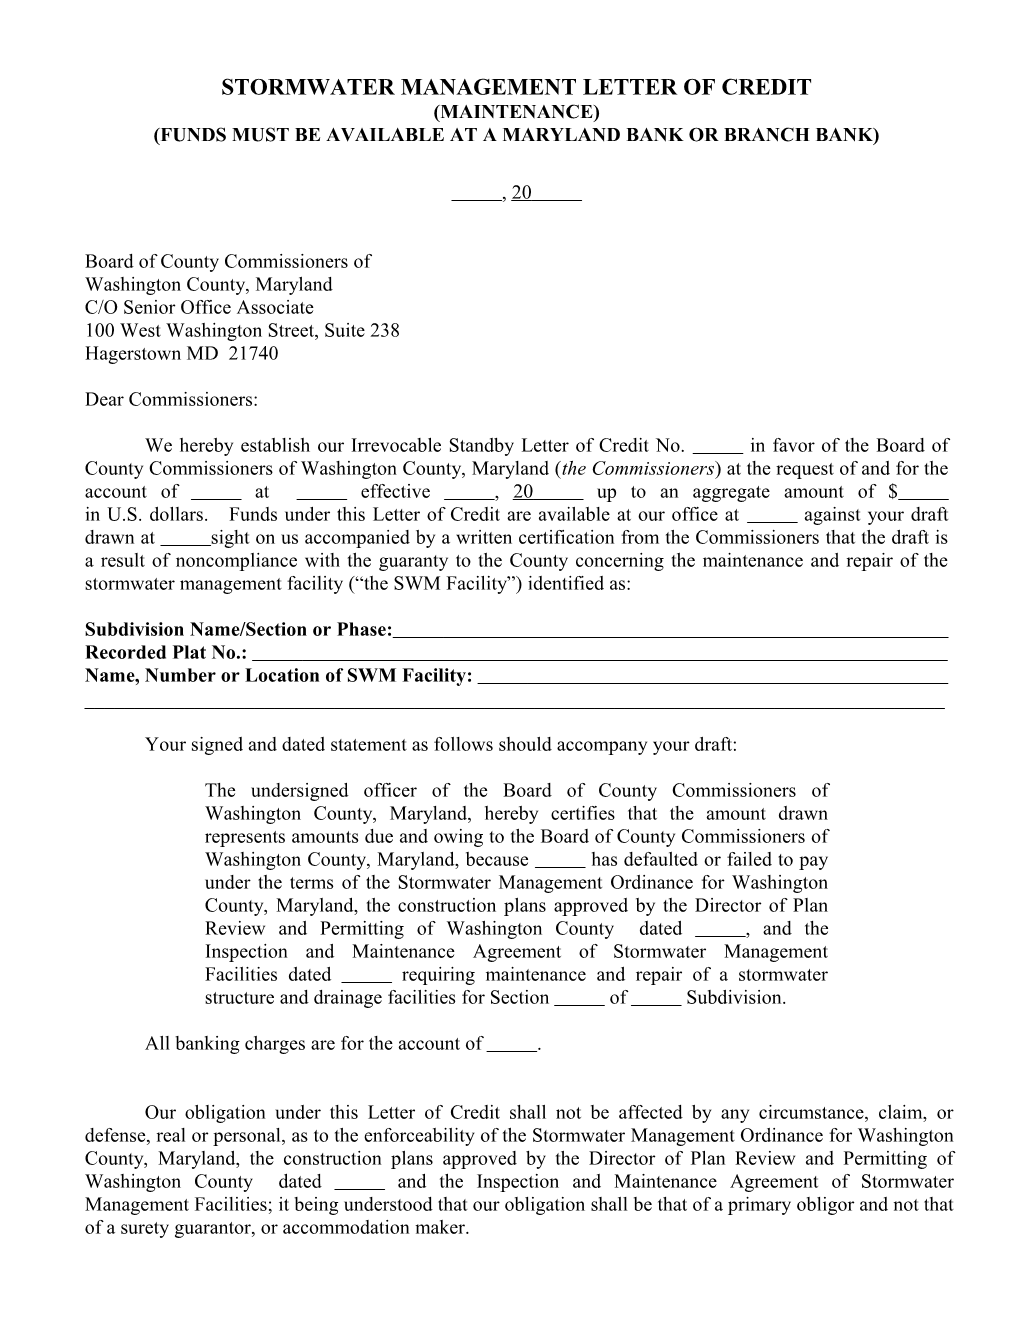 Stormwater Management Letter of Credit